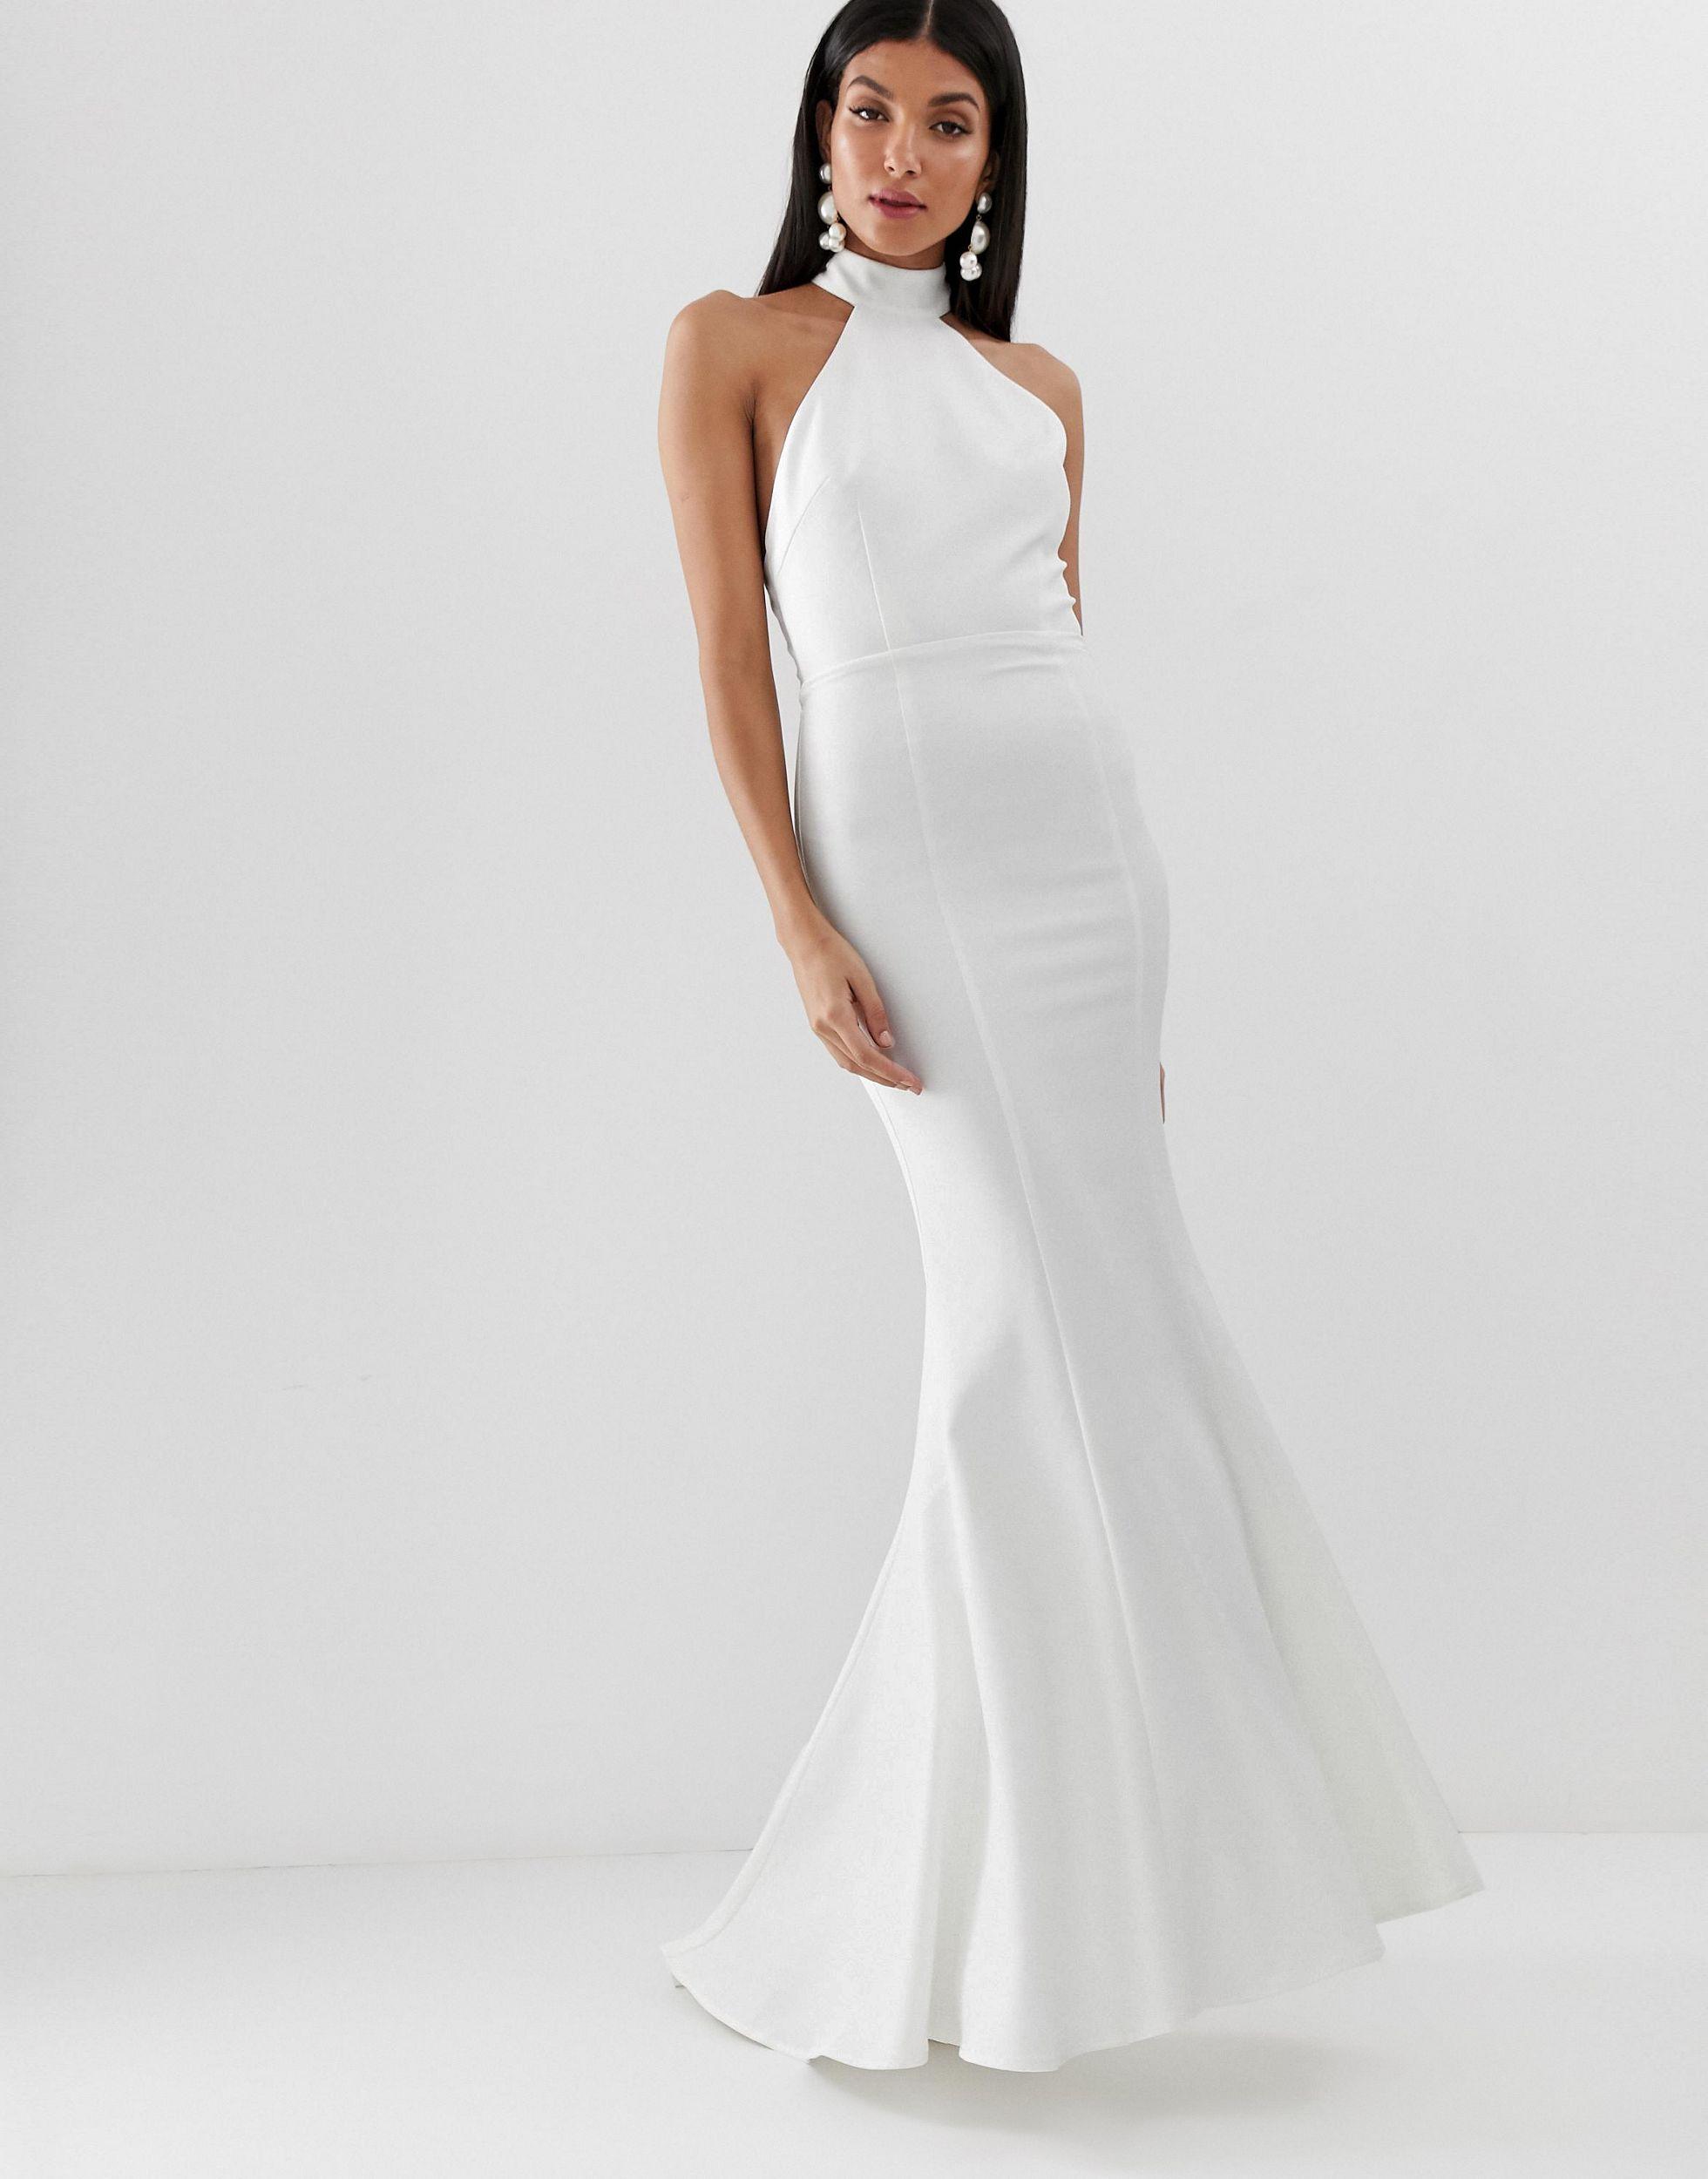 Jarlo Lace High Neck Trophy Maxi Dress With Open Back Detail in White | Lyst